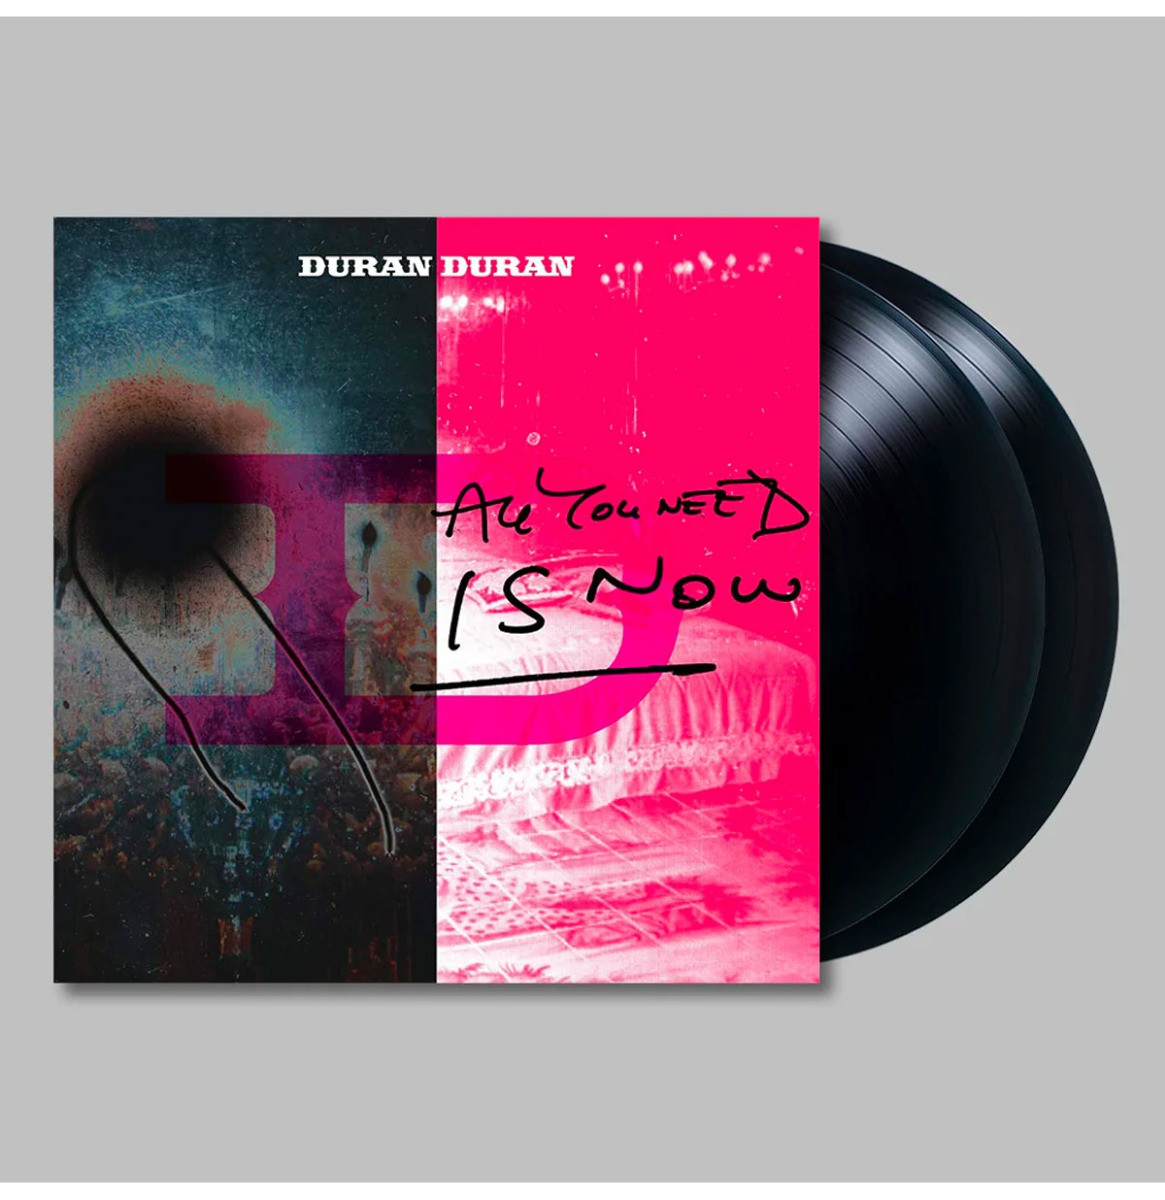 Duran Duran - All You Need Is Now 2LP